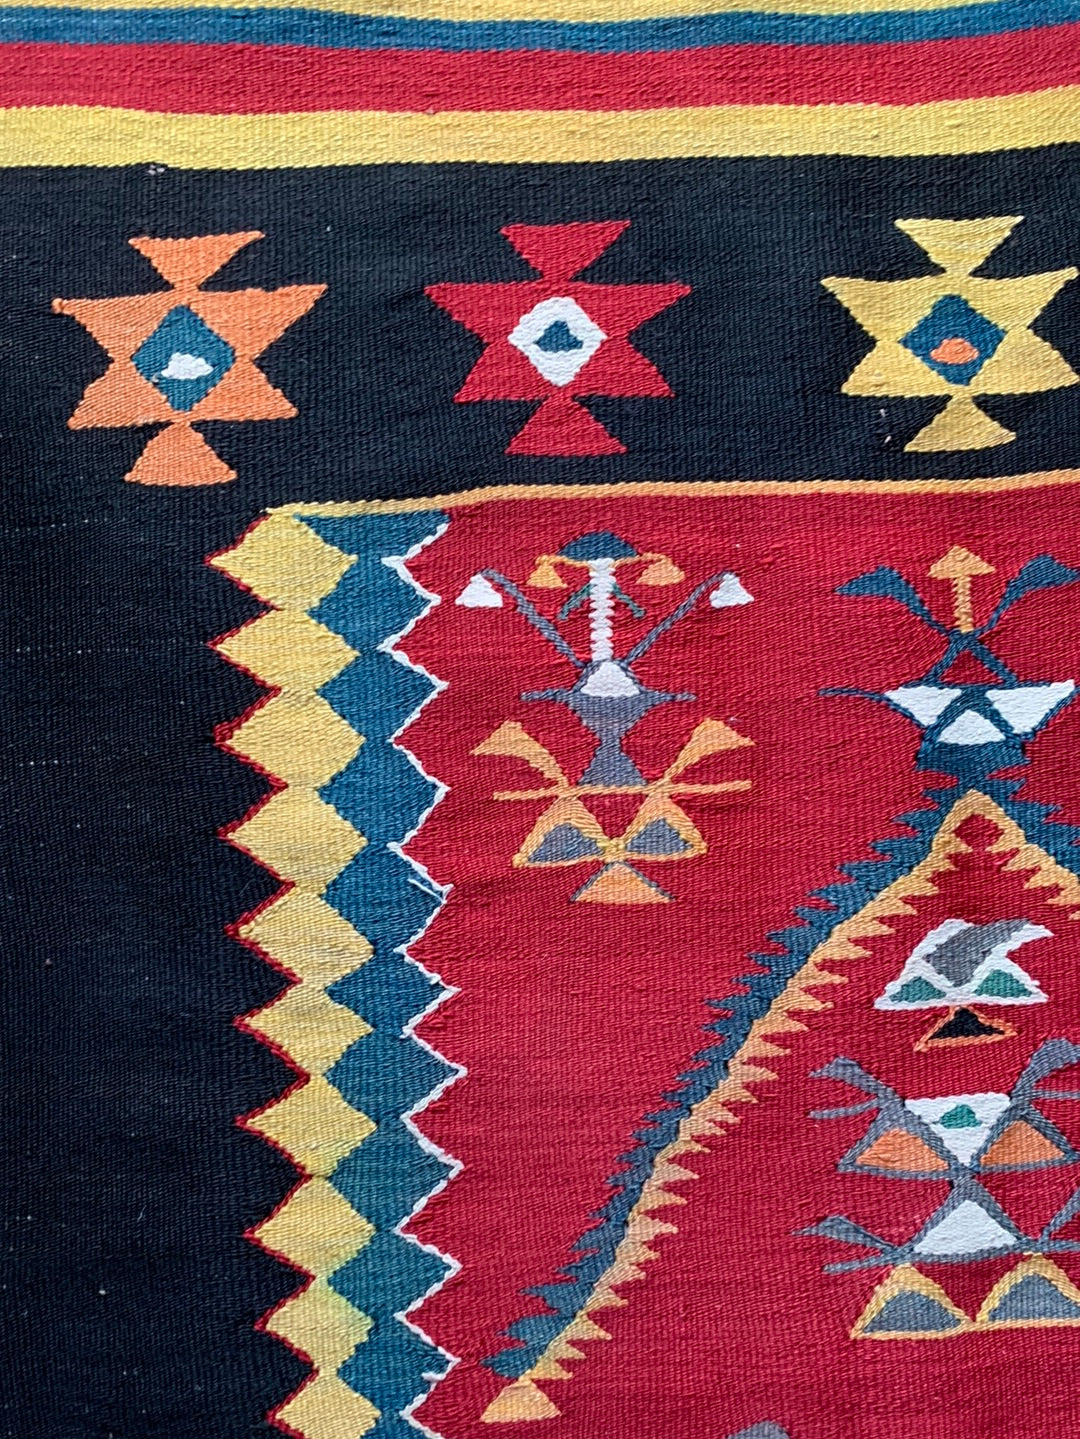 Red, yellow & teal rug with black border